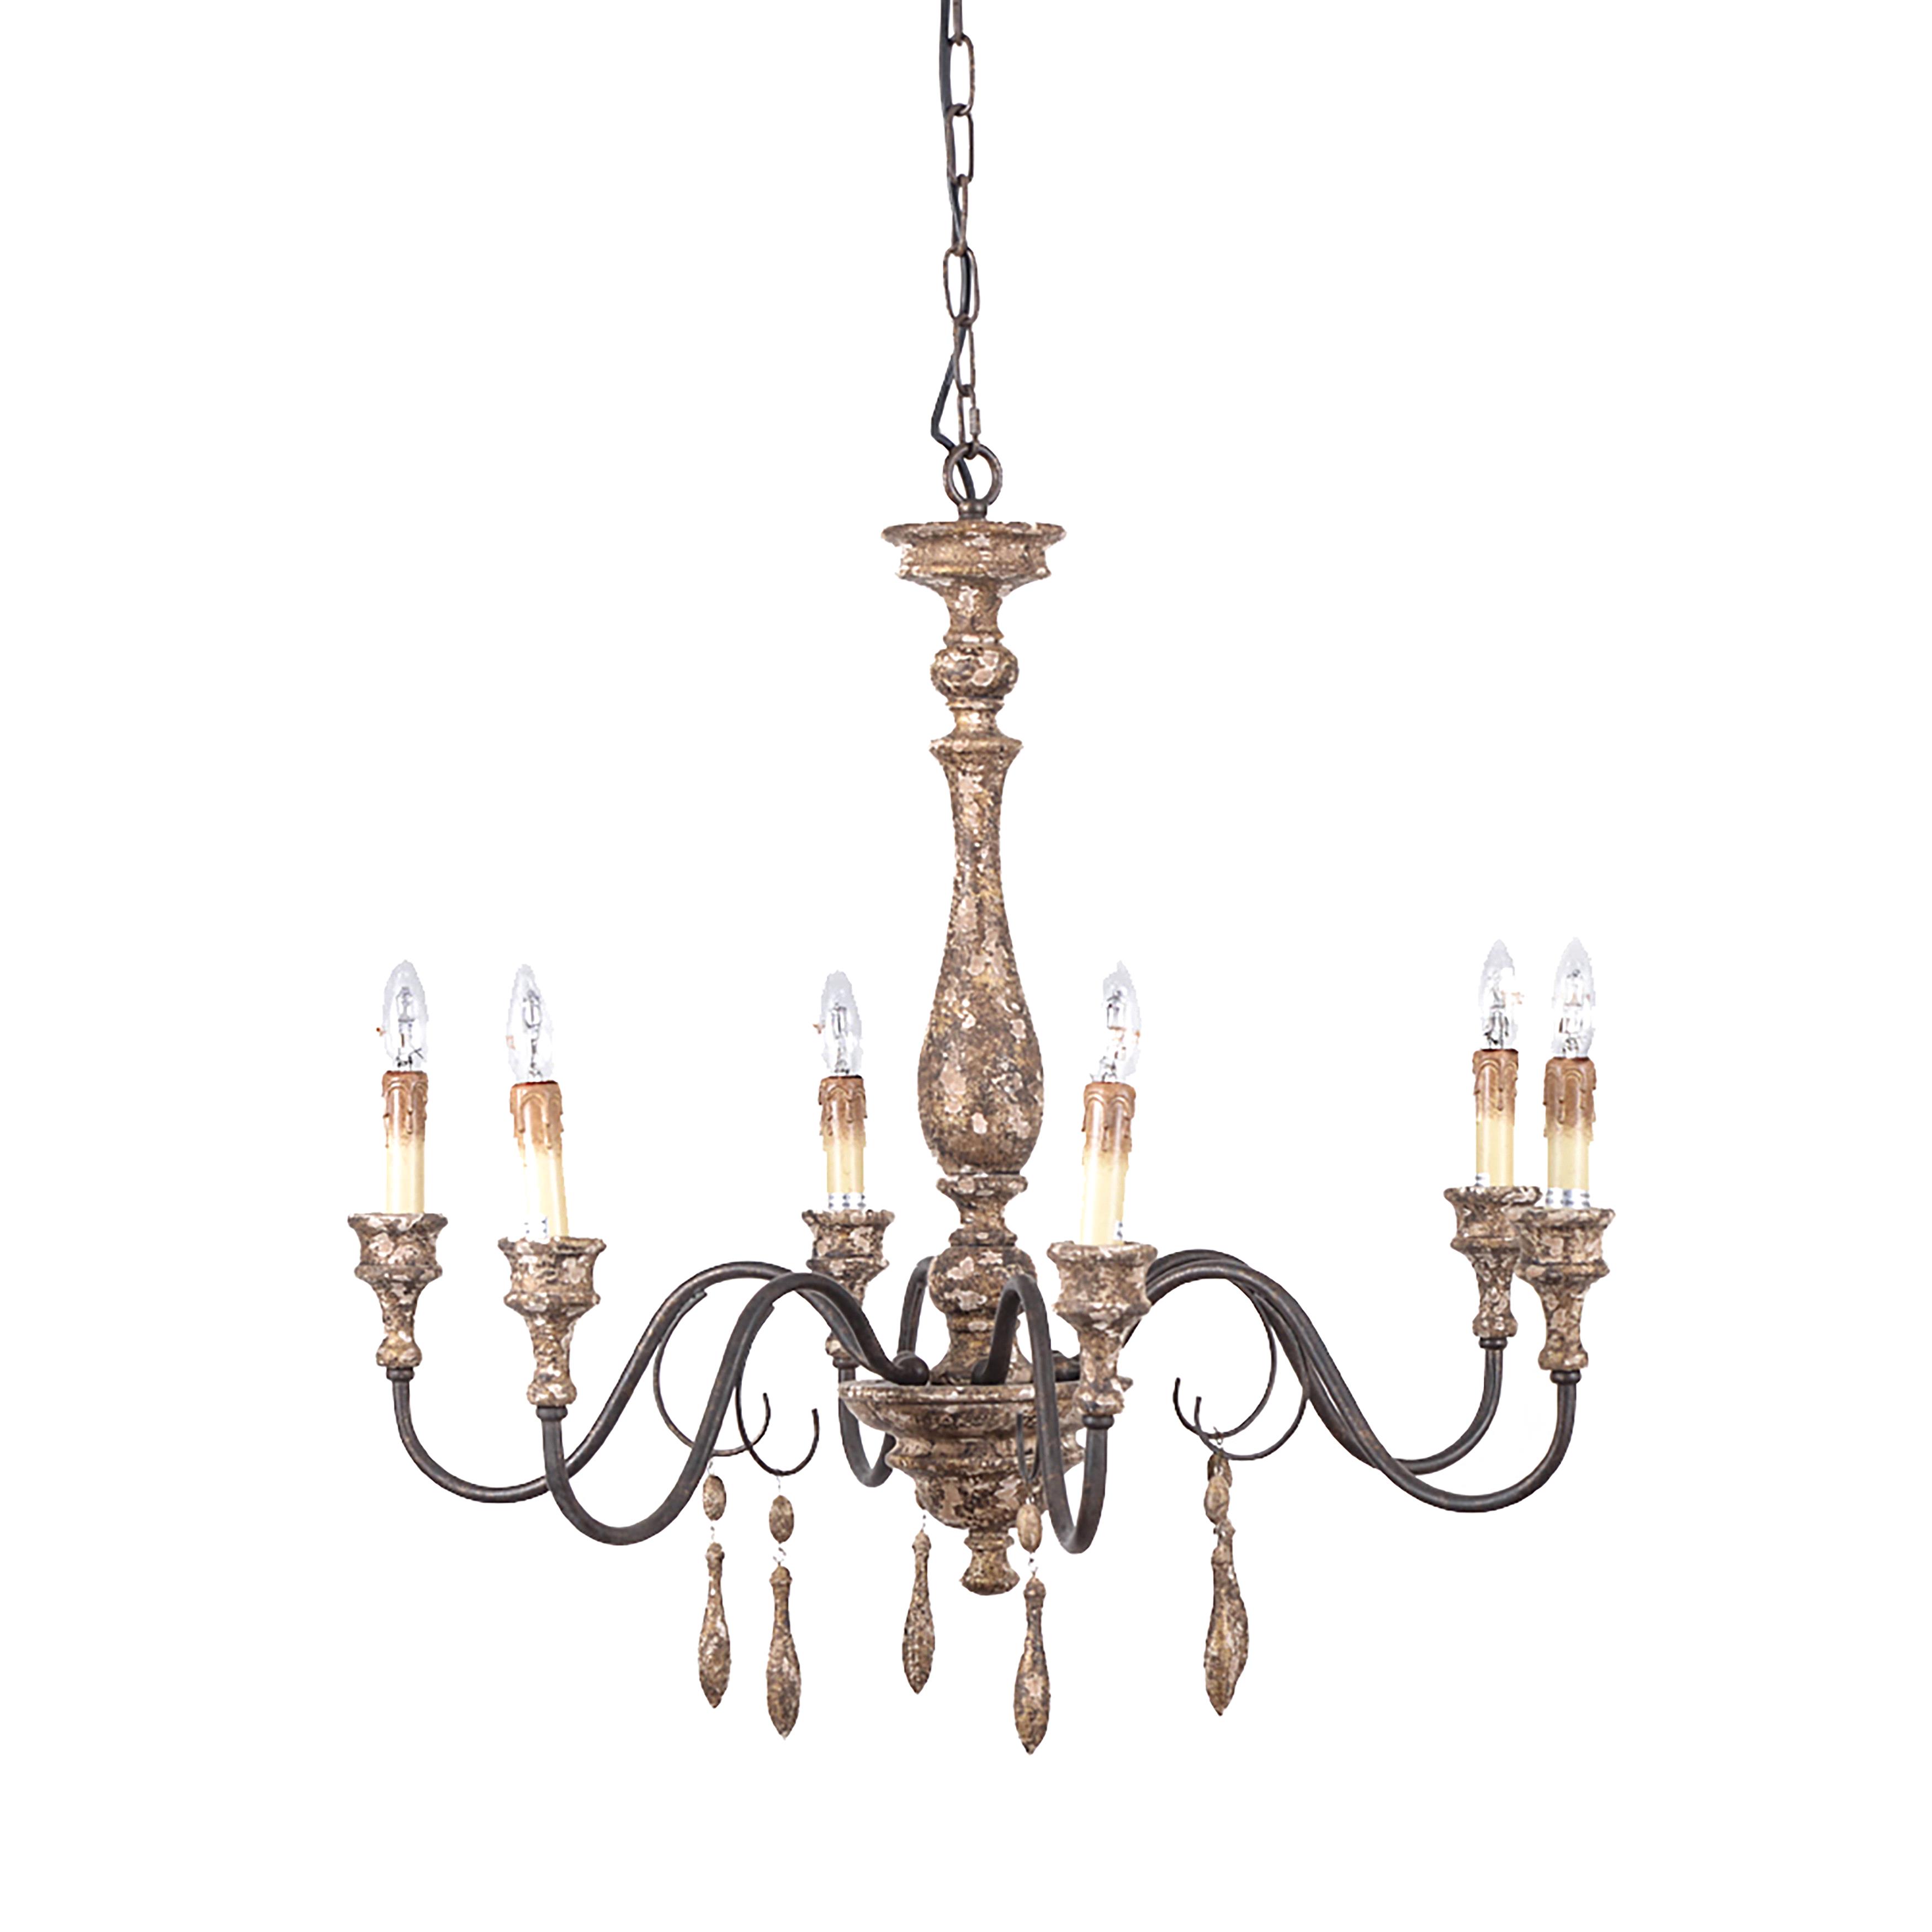 Home decors and accessories, LAMP AND CHANDELIER, LAMPADARIO VINTAGE 6 LAMP. D.76 CM